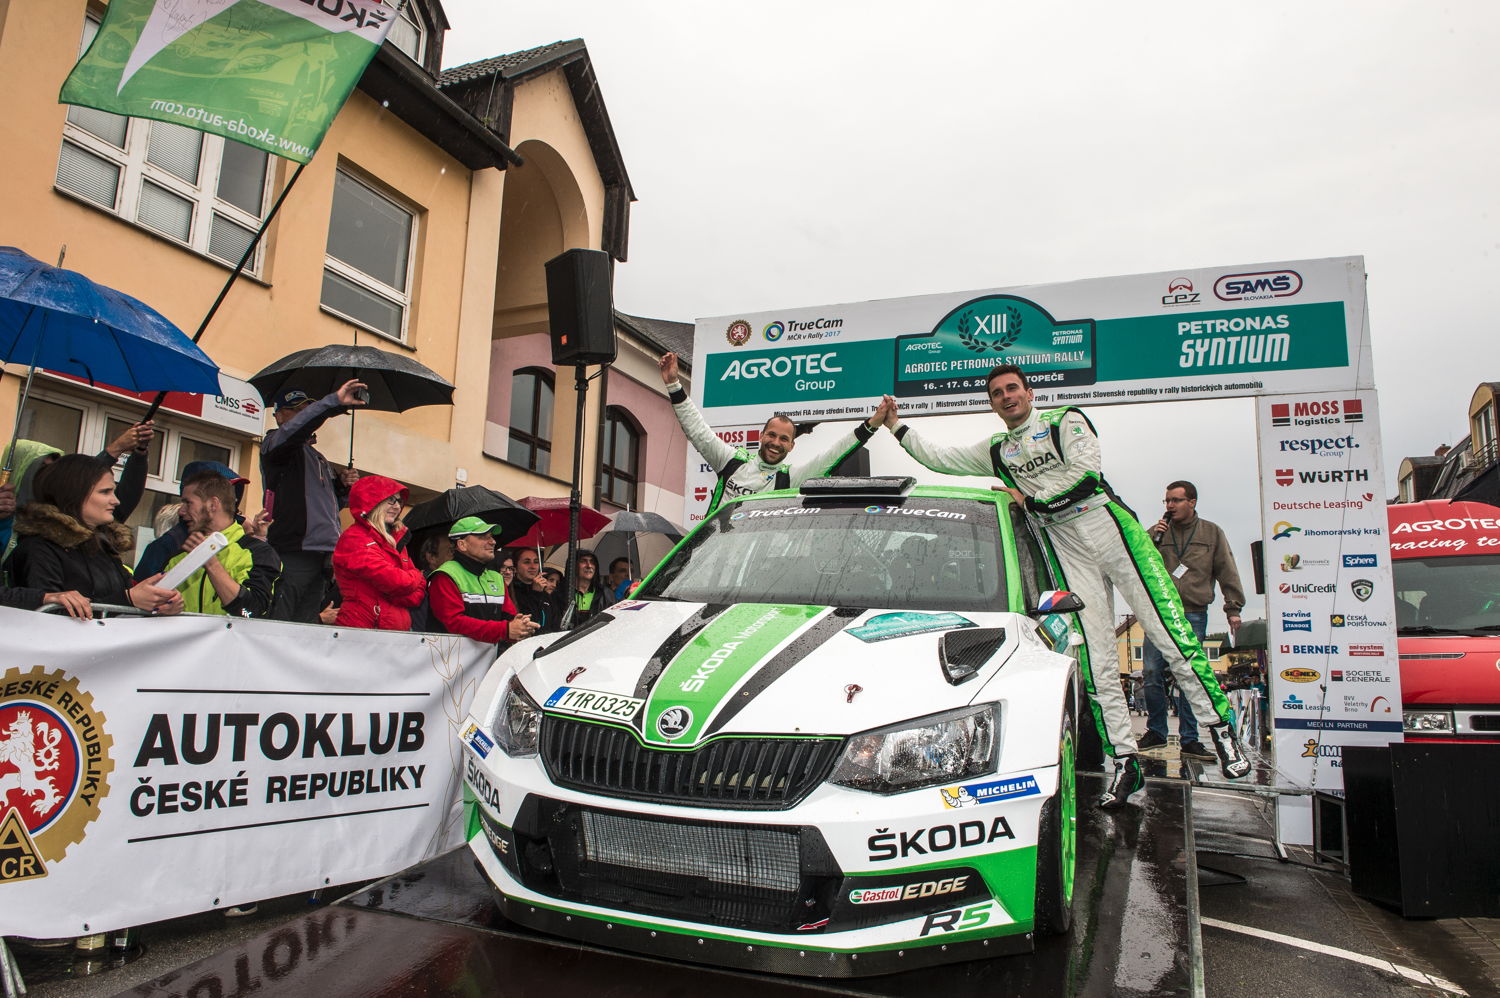 Jan Kopecký and co-driver Pavel Dresler (CZE/CZE), driving a ŠKODA FABIA R5 continued their winning streak with a dominant victory in the Czech Rally Championship at Rally Hustopeče